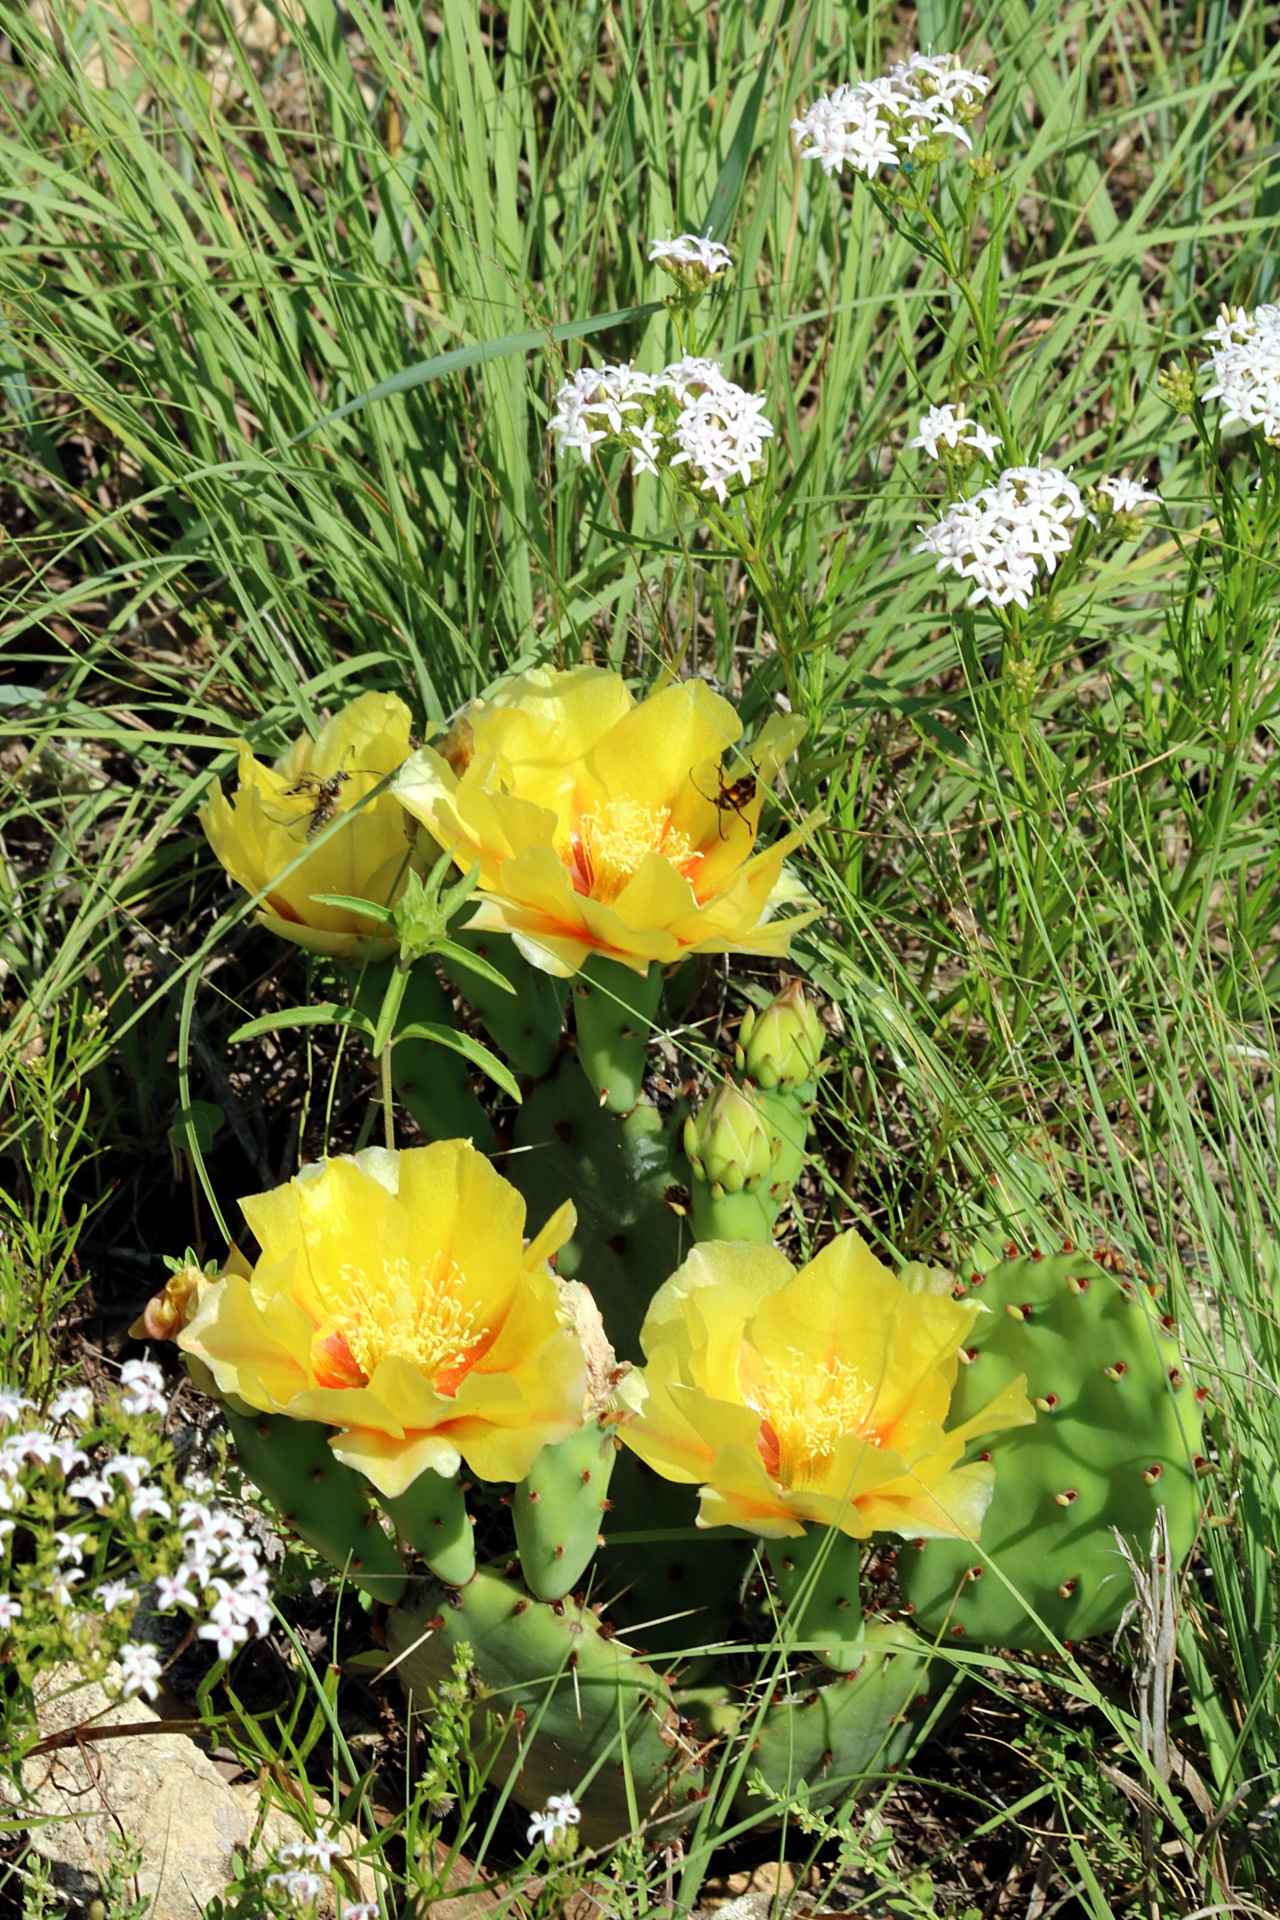 Portrait shot of a prickly pear cactus with its beautiful yellow blooms, surrounded by green wild grass and white wildflowers.